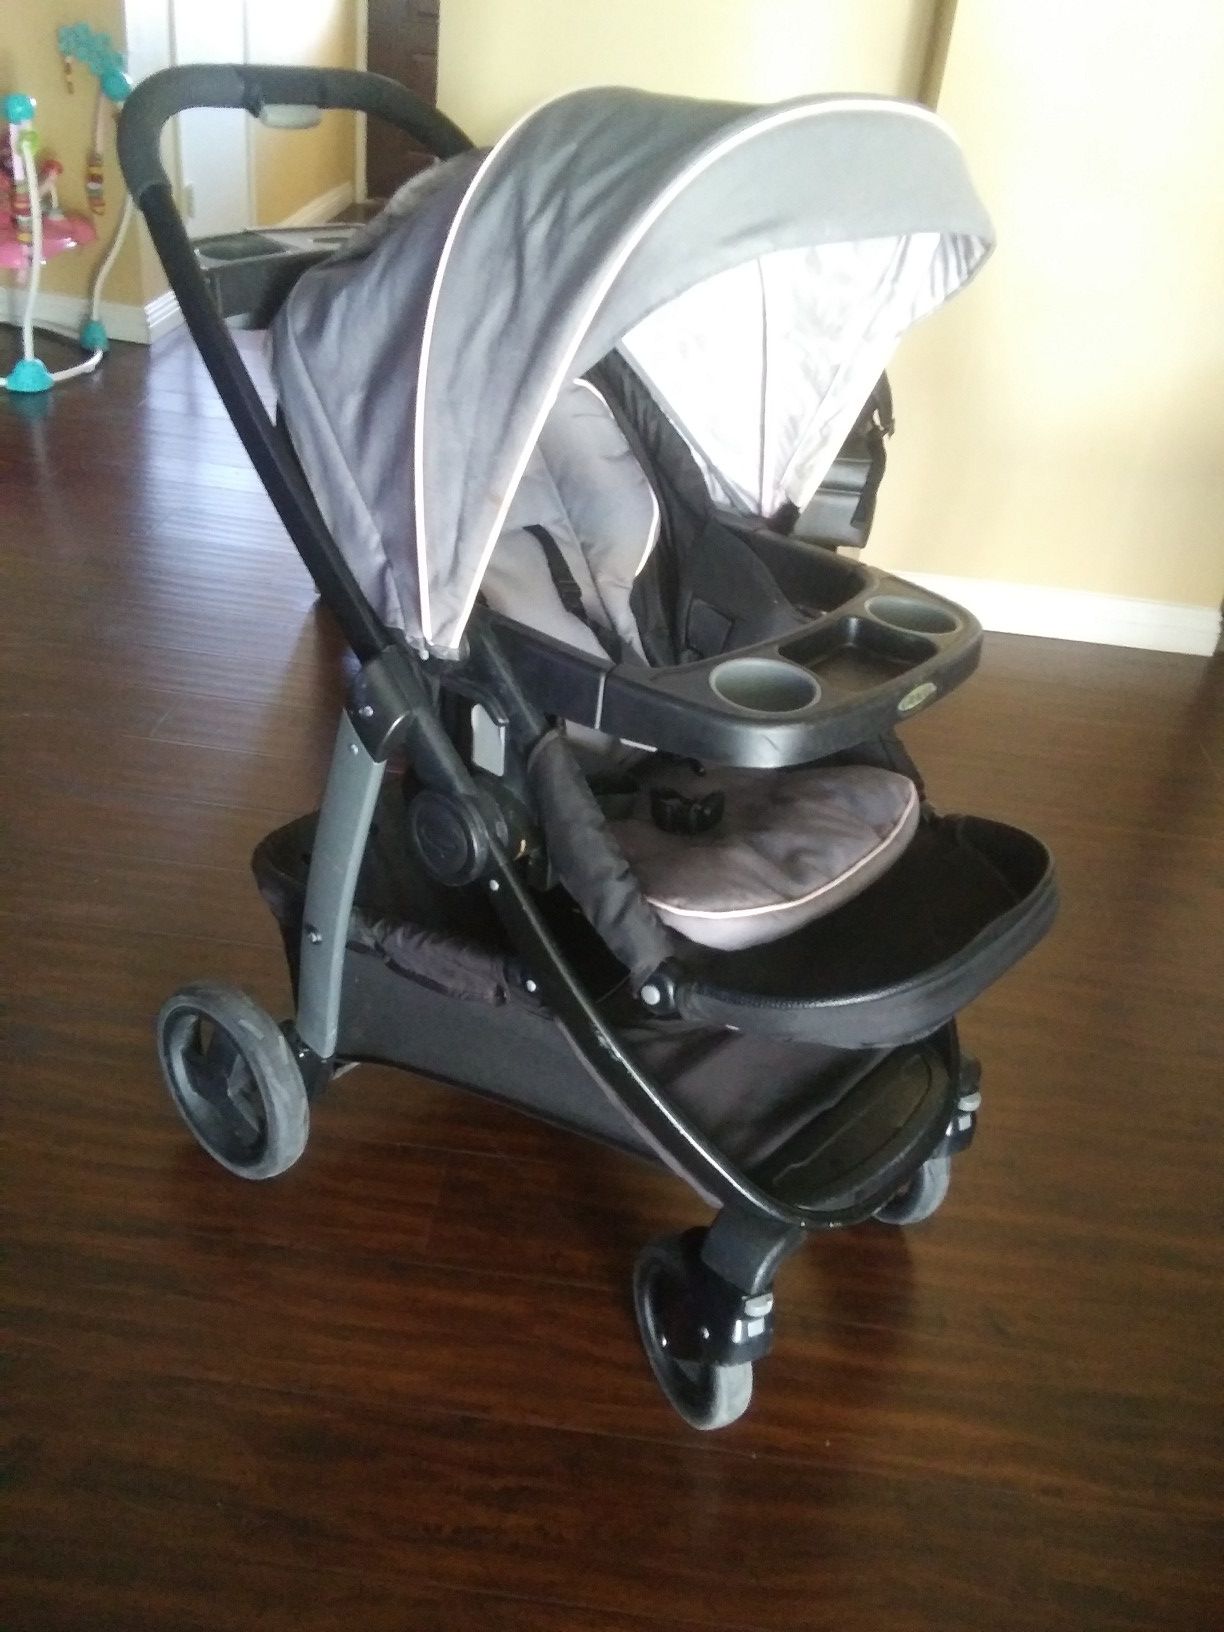 Graco stroller click and connect